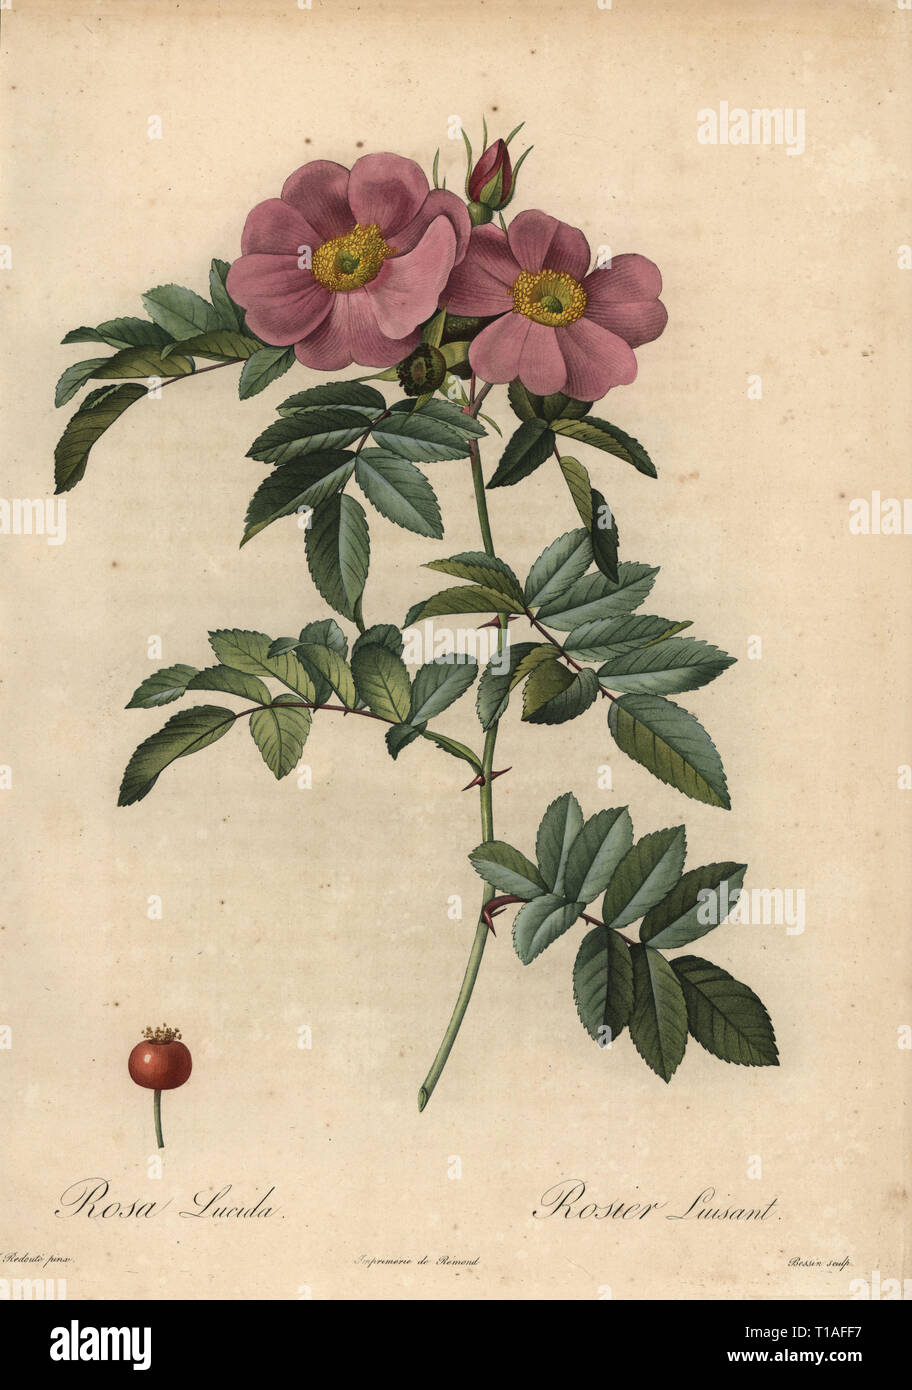 Violet Virginia rose, Rosa virginiana. Rosa lucida, Rosier luisant. Rosier  a feuilles luisantes. Stipple copperplate engraving by Rosine-Antoinette  Bessin handcoloured a la poupee after a botanical illustration by  Pierre-Joseph Redoute from the